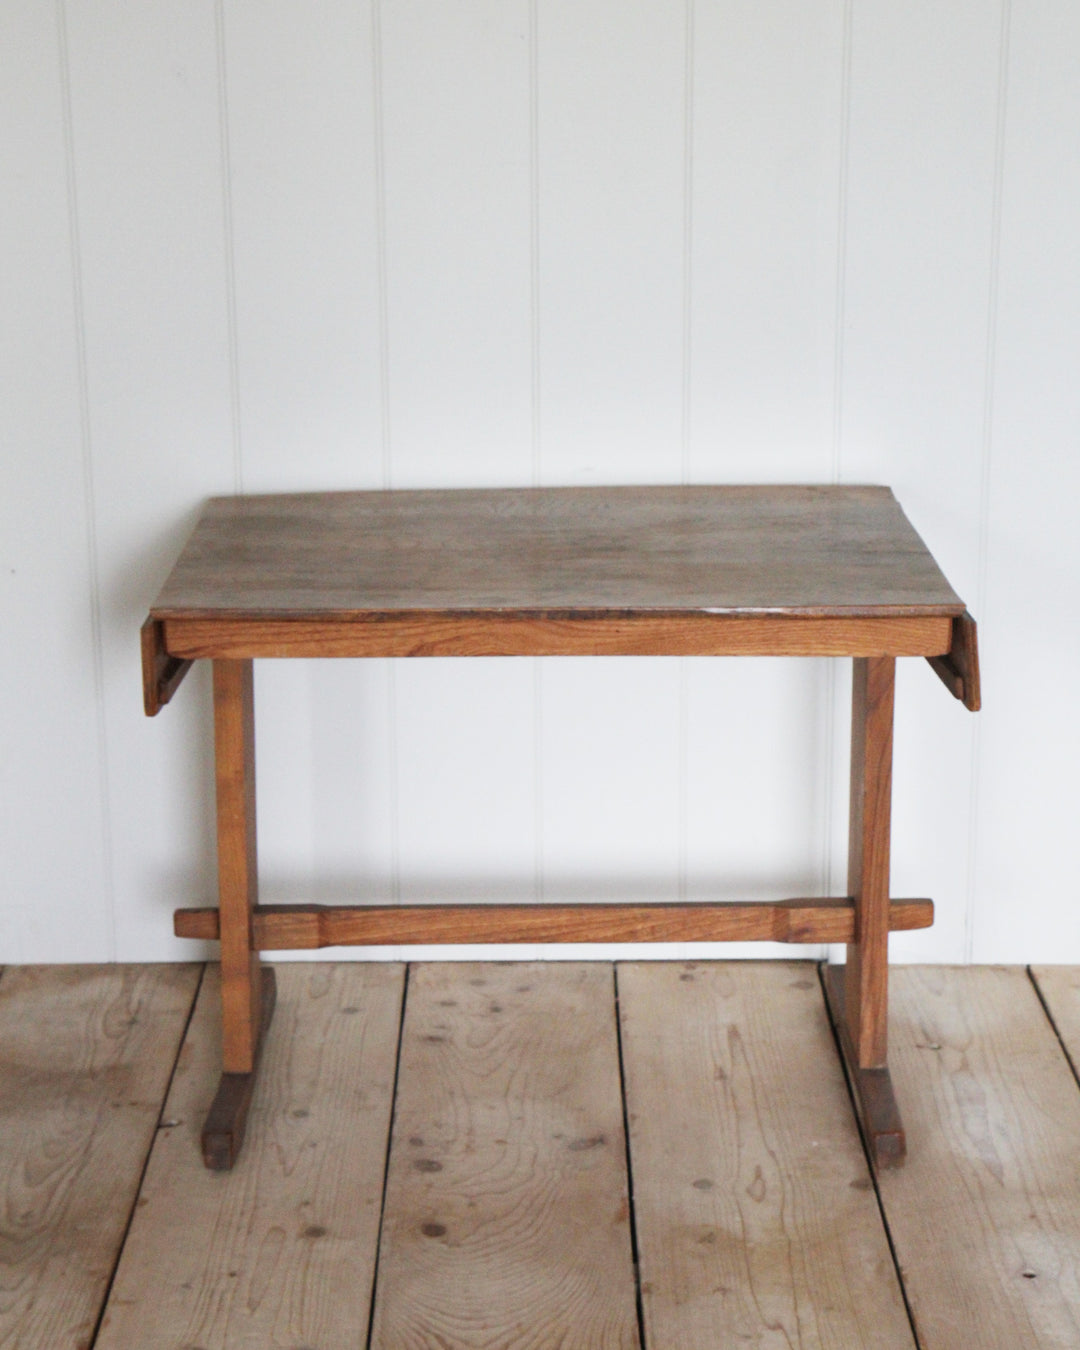 Ash Table - After Cotswold School